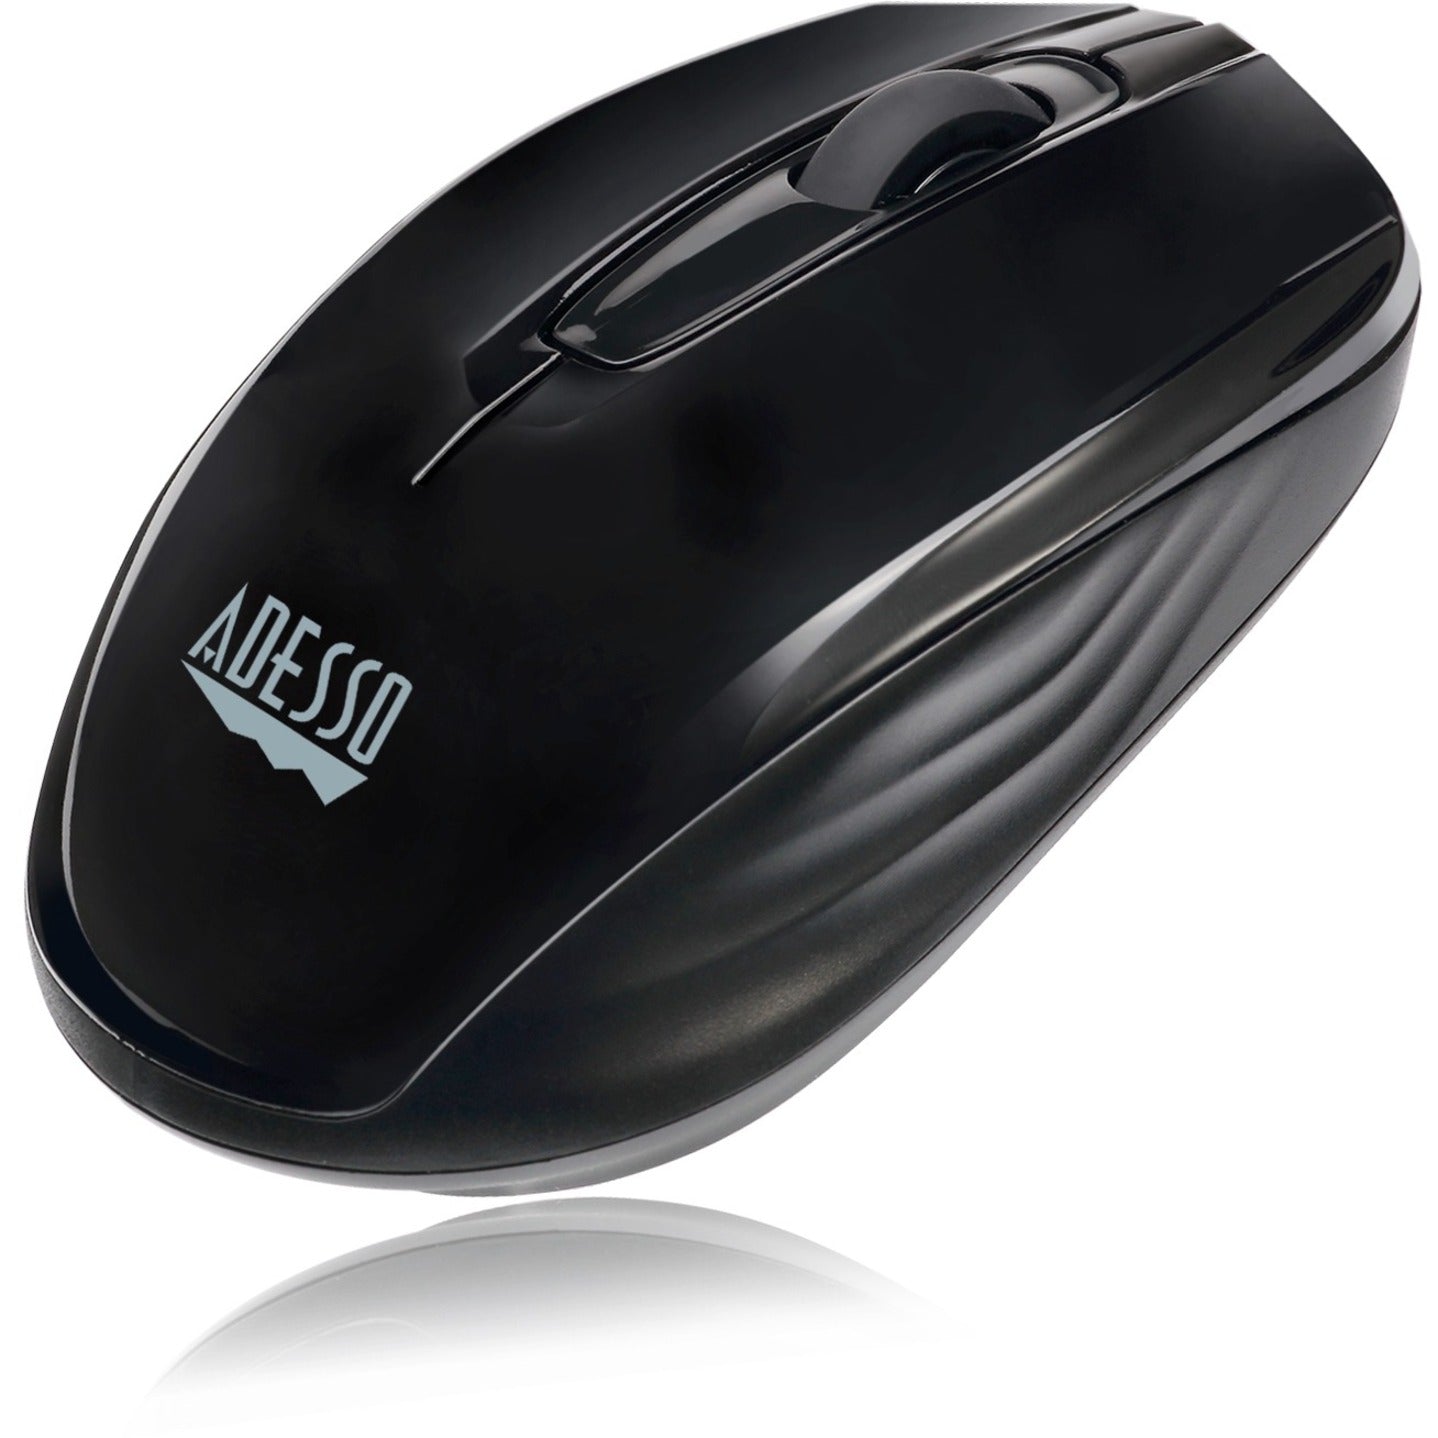 Adesso IMOUSES50 iMouse S50 - 2.4GHz Wireless Mini Mouse, Ergonomic Fit, 1200 dpi, Black